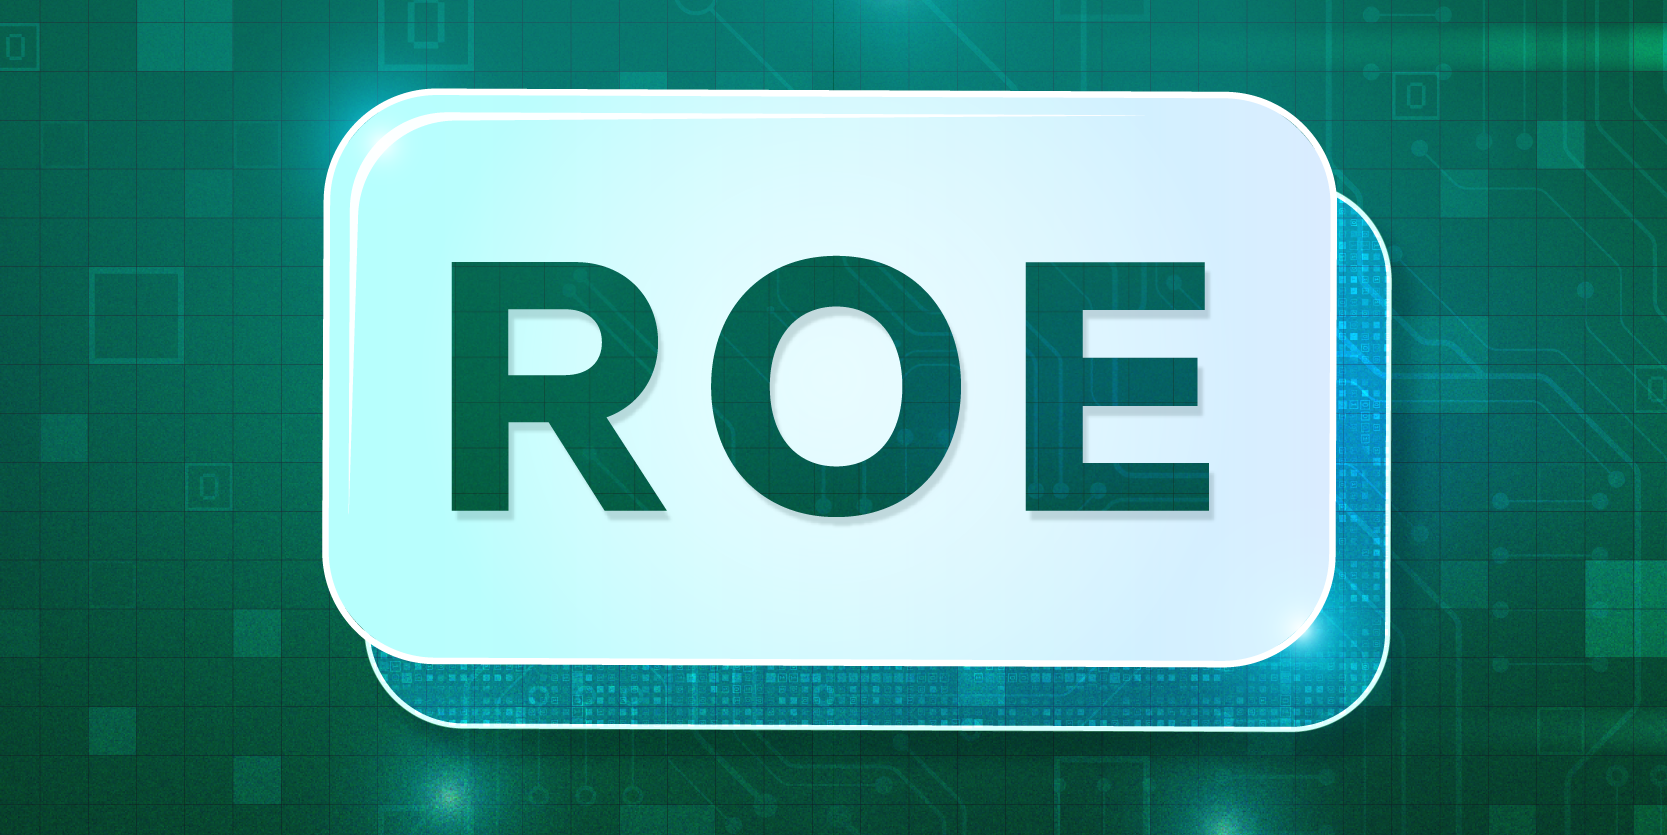 Acronym ROE (return on equity) on a futuristic Button with circuit board texture background